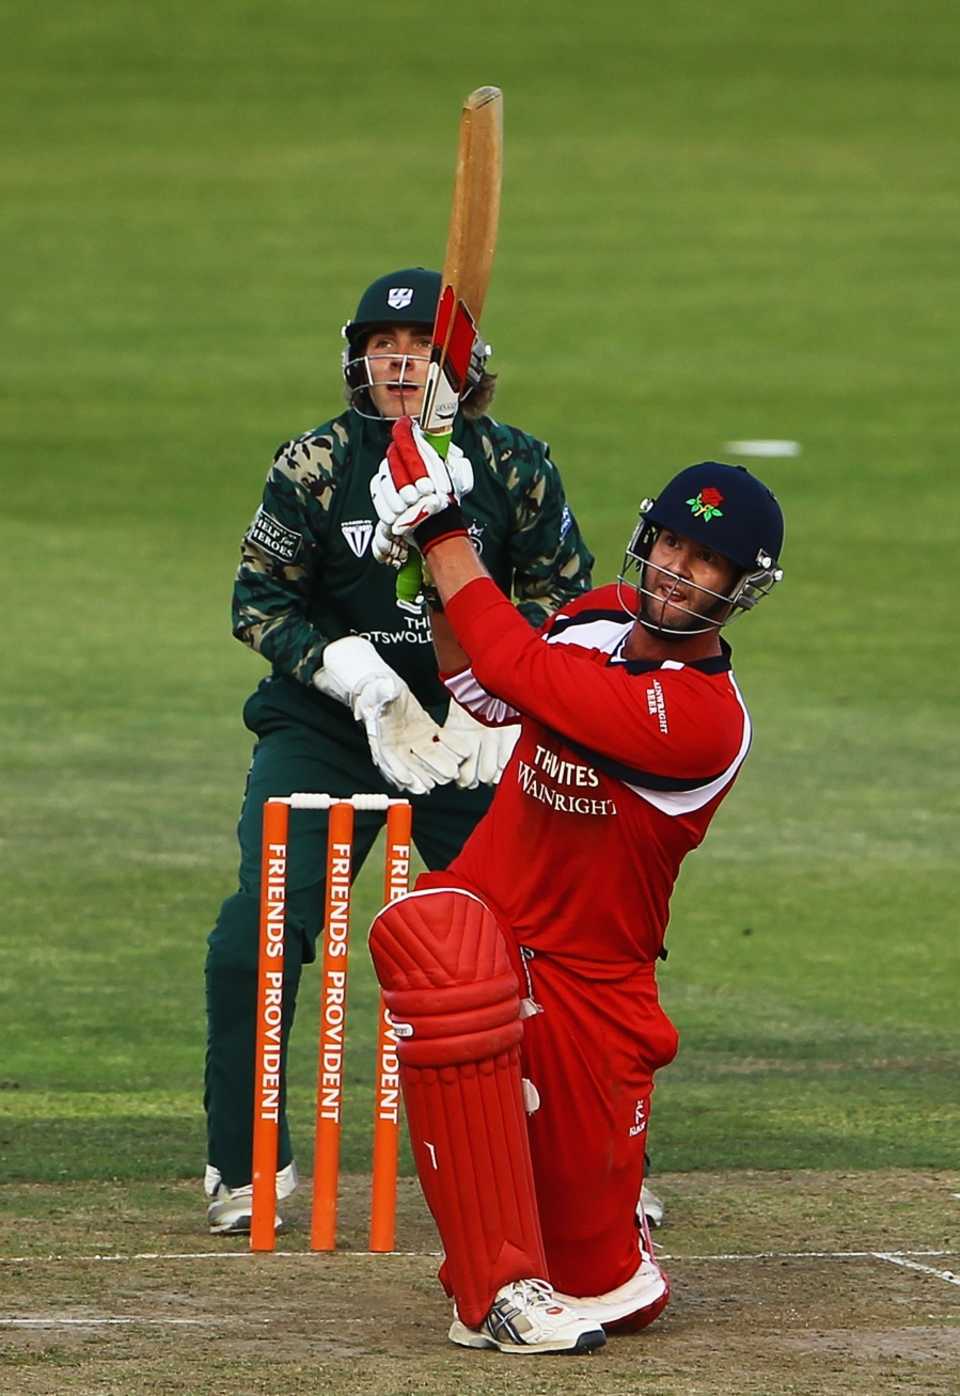 Tom Smith cracked 92 and then took three wickets in a sparkling allround performance, Lancashire v Worcestershire, Friends Provident t20, Old Trafford, July 5 2010